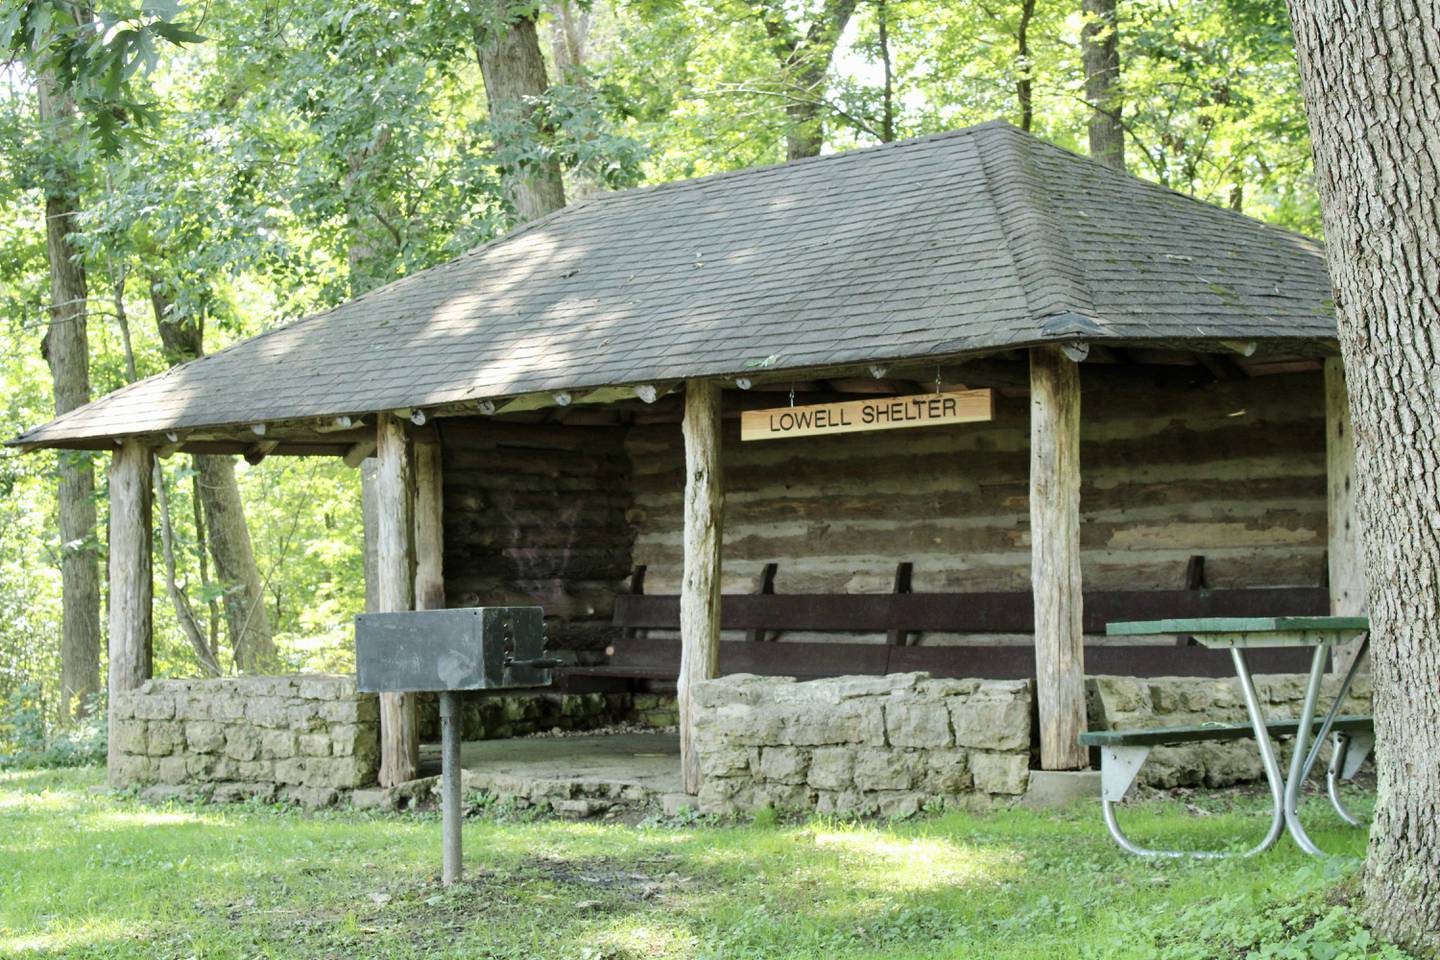 Lowell Shelter, a limestone structure situated atop the Overlook  is seen Wednesday at Lowell Park. The shelter is accessible via Hairpin Road within Lowell Forest and is one of the six place that will be part of a driving tour Sunday highlighting the park's historic sites.